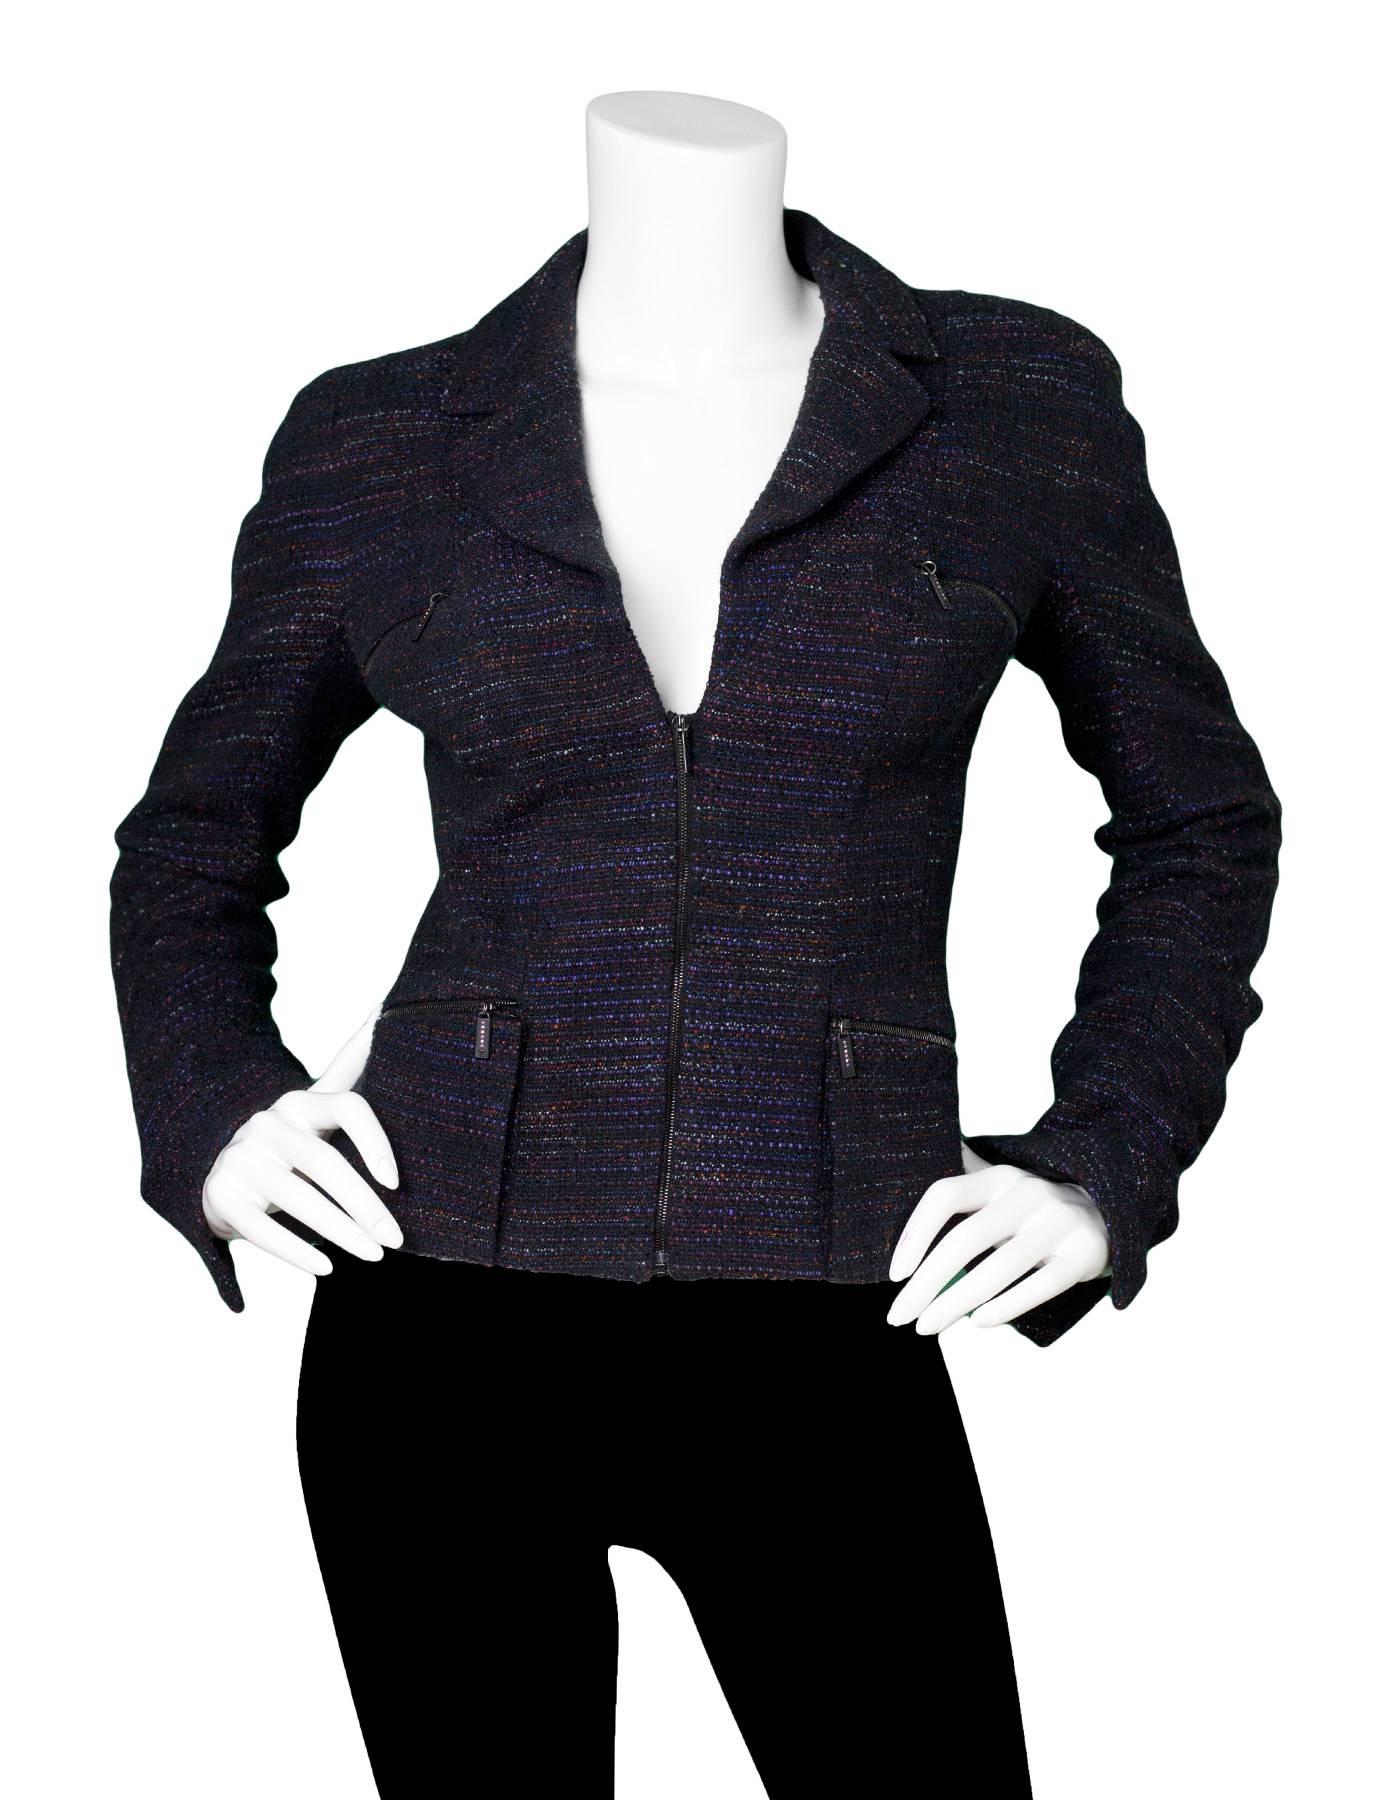 Chanel Multi-Colored Tweed Jacket 
Features crystal details on zipper pulls of pockets

Made In: France
Year of Production: 2002
Color: Black and multi-colored
Composition: 55% acrylic, 20% nylon, 14% cotton, 11% polyester
Lining: Black, 95% silk,